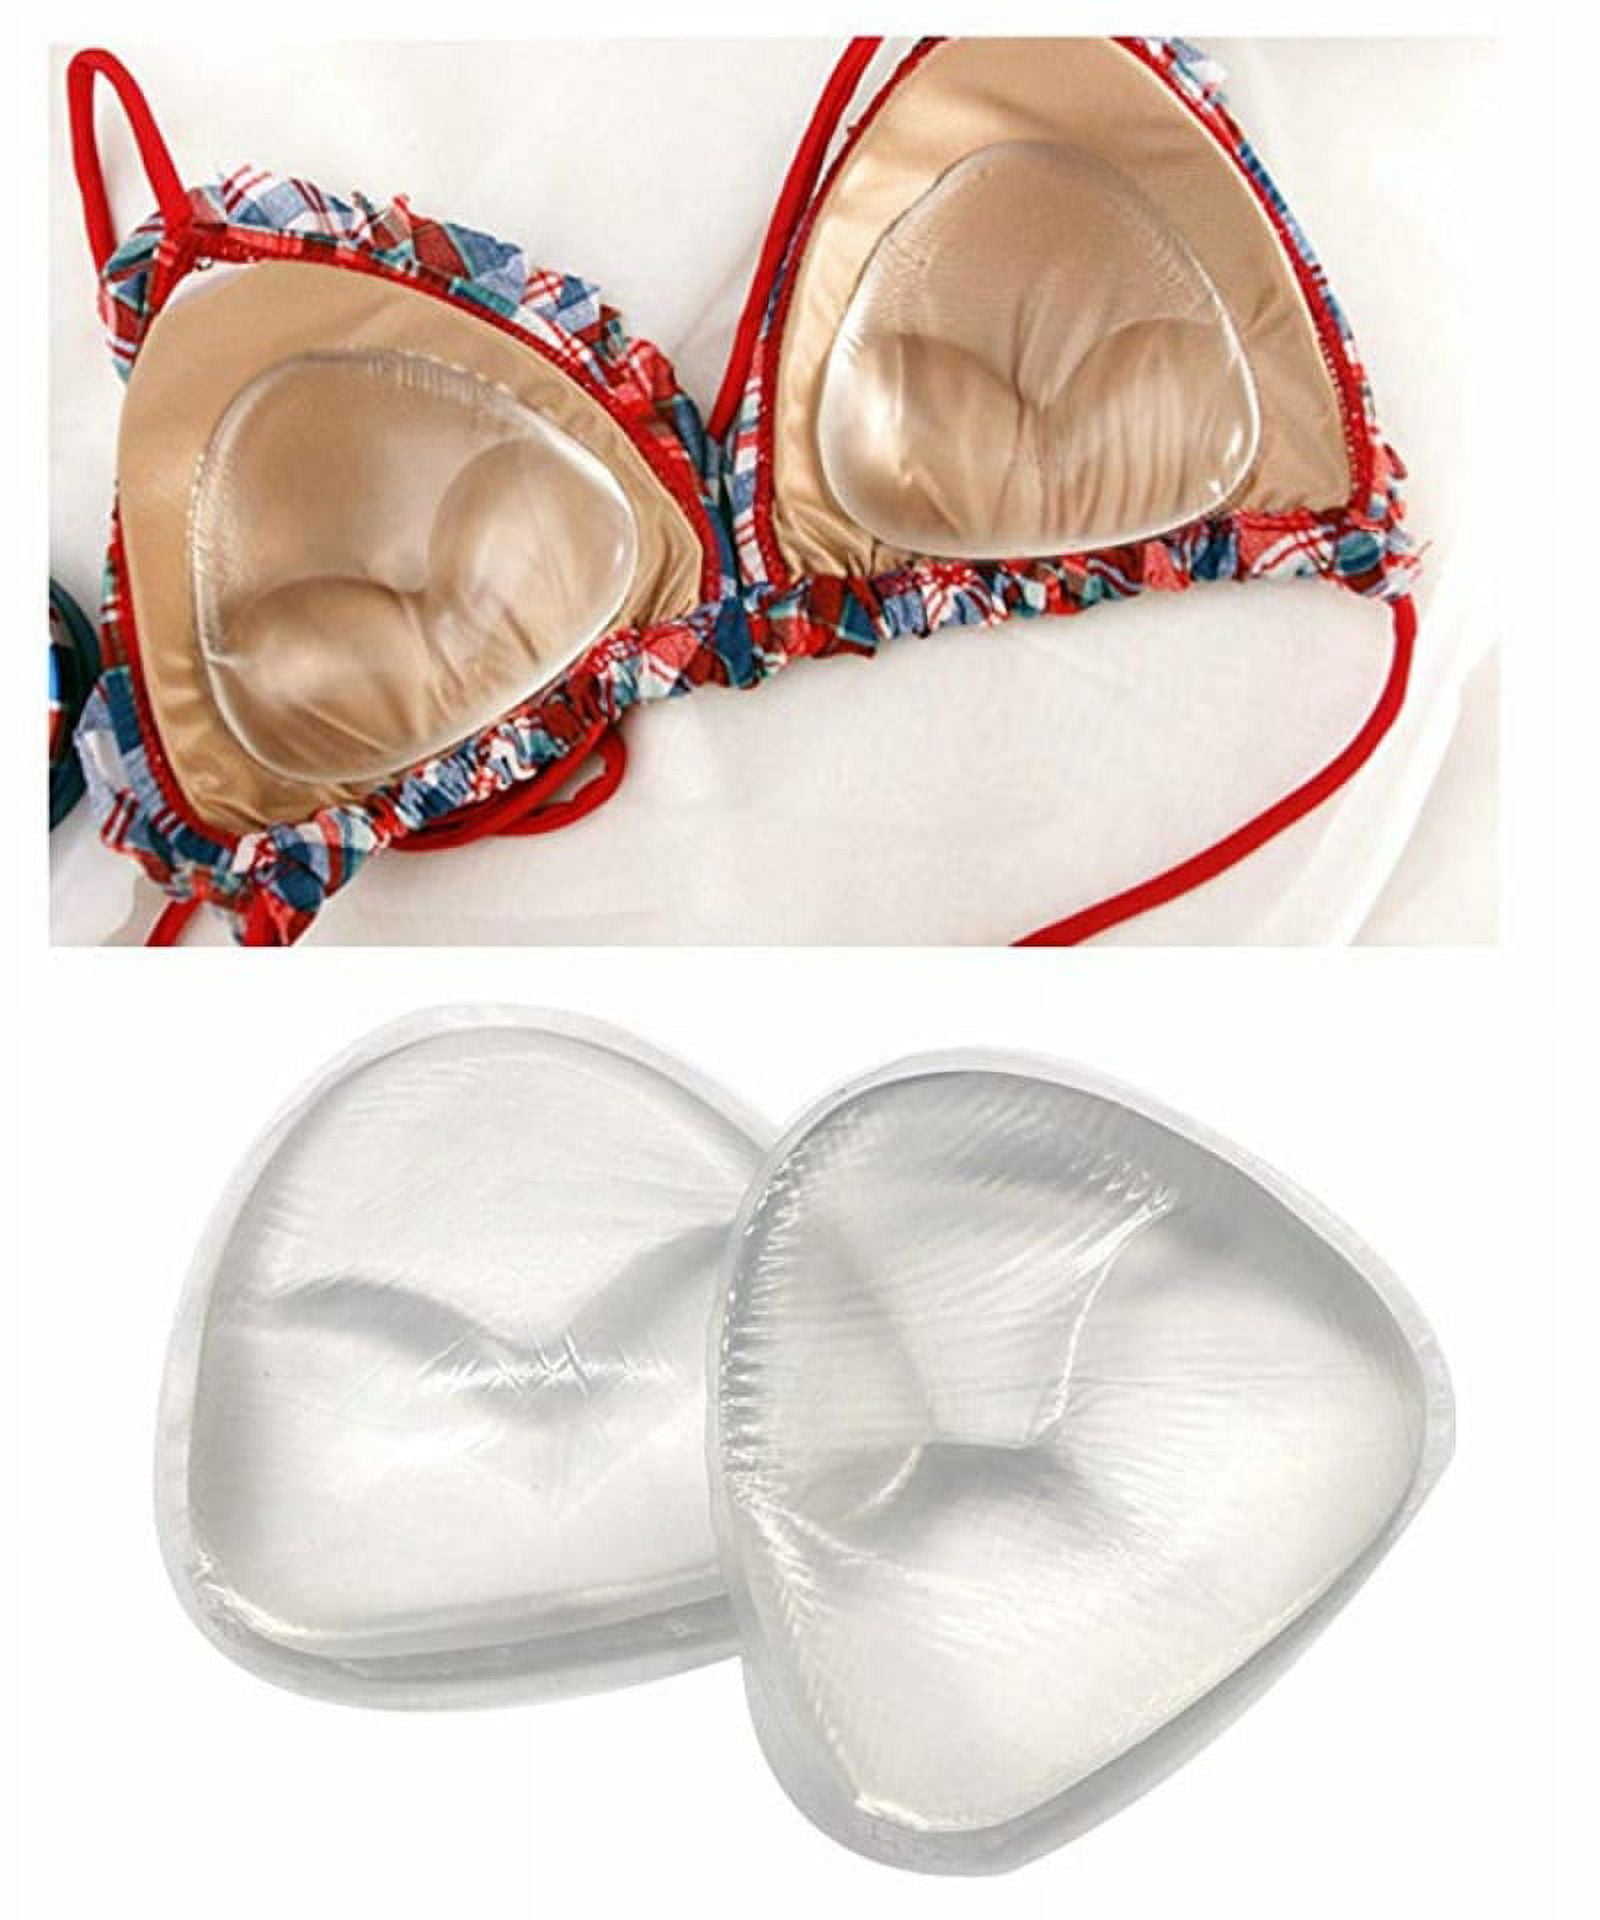 1 Pair Silicone Bra Inserts Push-up Breast Pads Reusable Breast